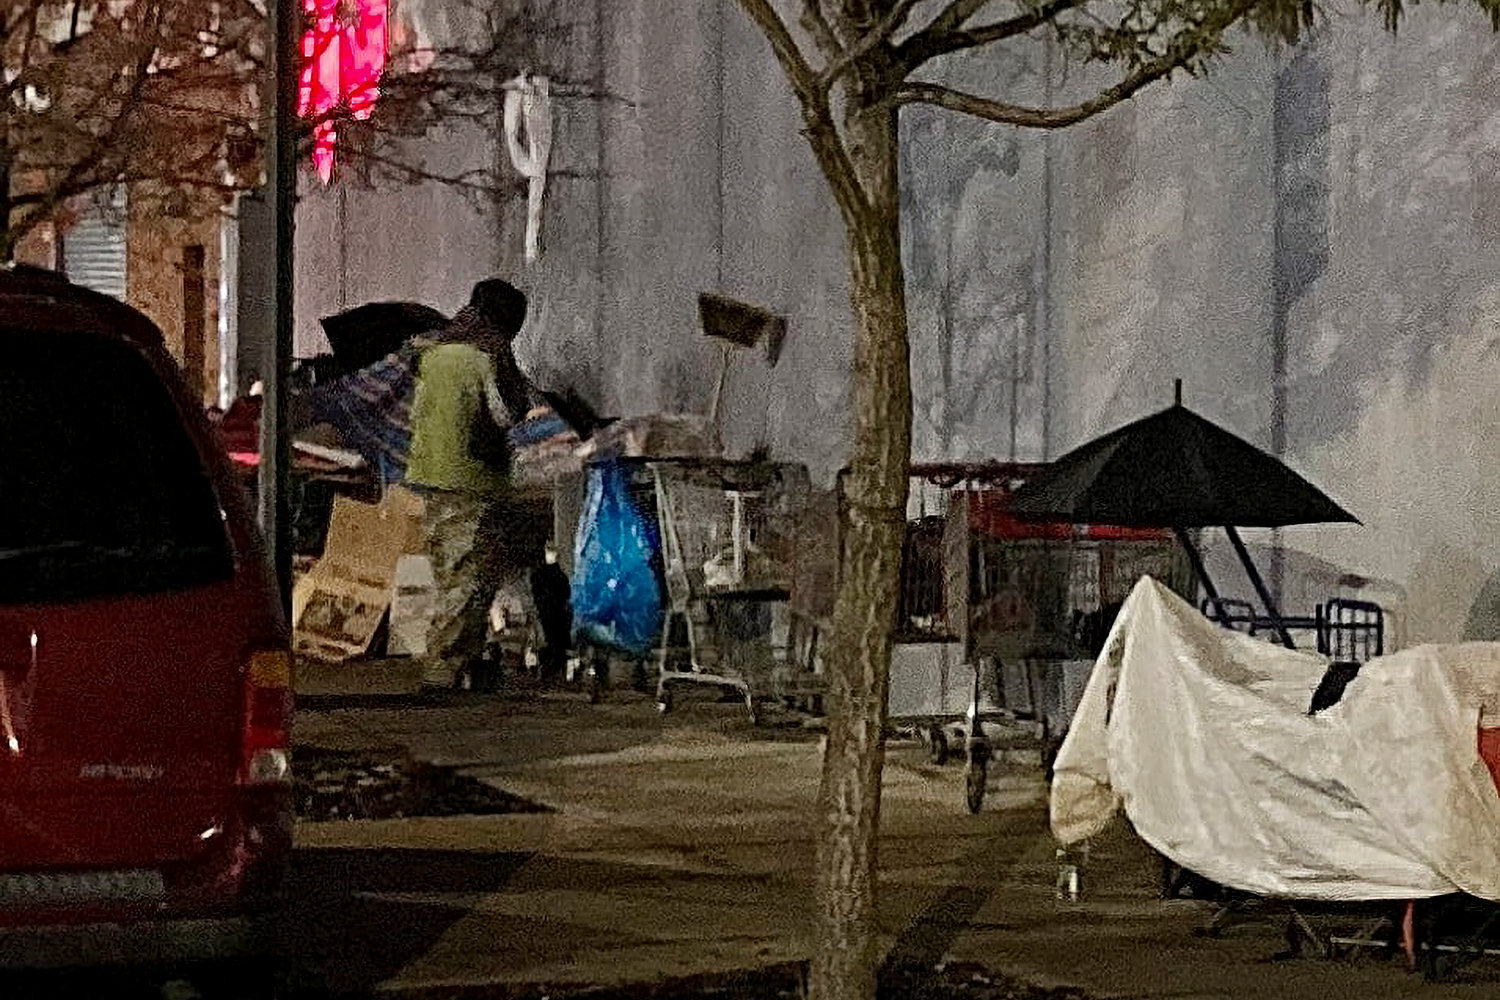 A homeless person tends to his belongings along the intersection of West 236th Street and Broadway recently. The city’s department of sanitation has cleared out that area since.